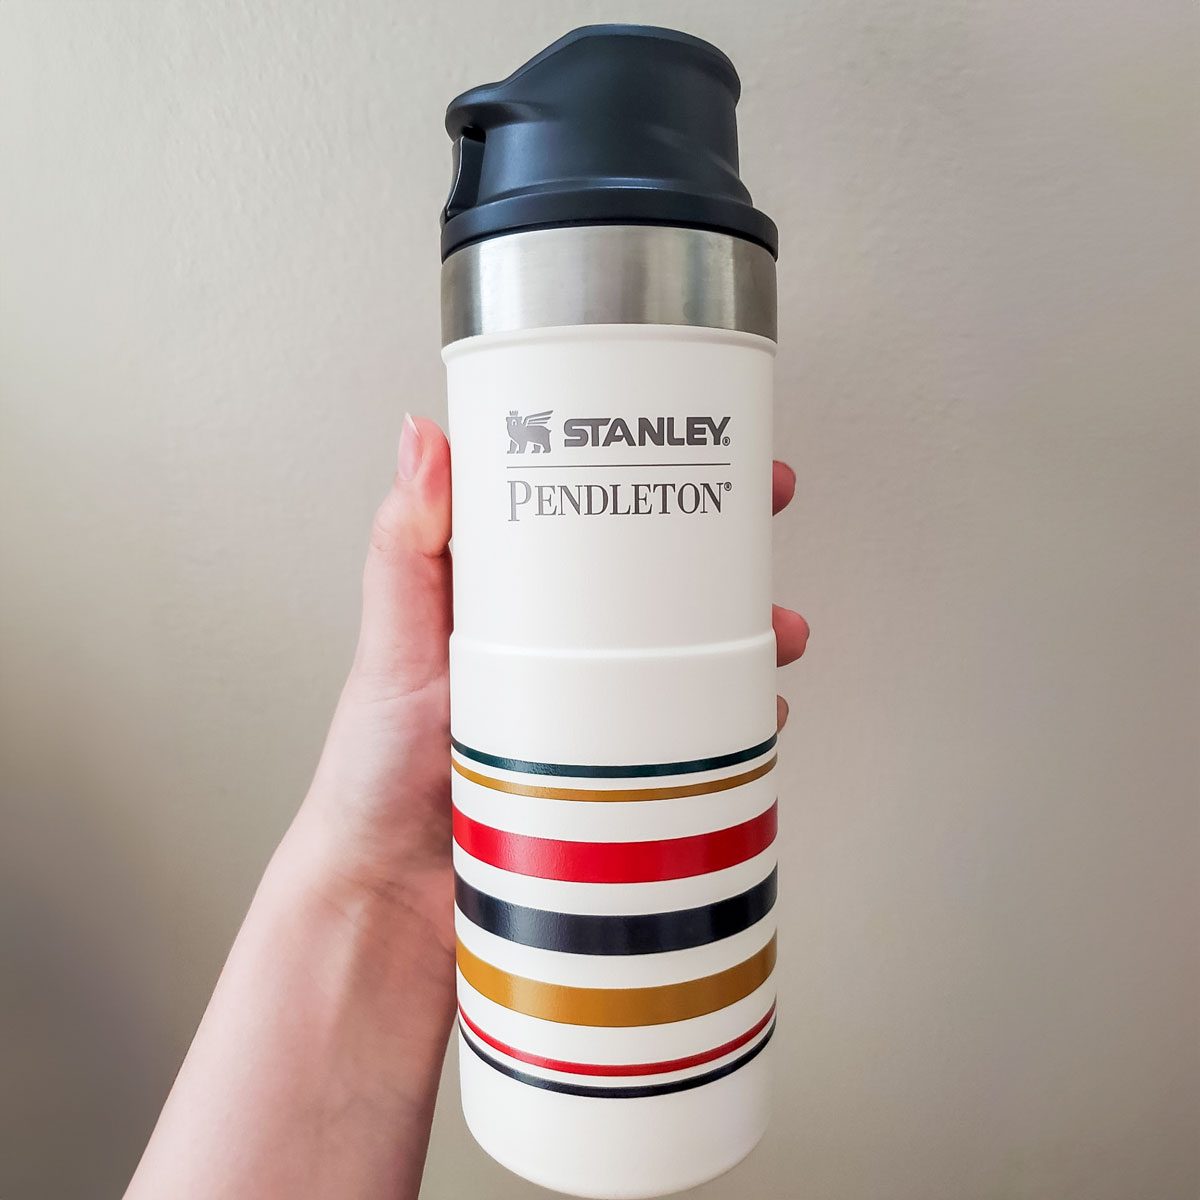 <h3>Stanley Classic Trigger-Action Travel Mug</h3> <p><span>Classy, portable and easy to carry, the </span><a href="https://www.stanley1913.com/products/classic-trigger-action-travel-mug-16-oz" rel="noopener"><span>Stanley Classic Trigger-Action Travel Mug</span></a><span> keeps drinks cool all day. A spill-proof lid locks in place for sips free from splashes. I also love that it only requires one hand to drink thanks to a clever push-button trigger.</span></p> <p><span>Ppick up a </span><a href="https://www.familyhandyman.com/article/stanley-french-press/"><span>Stanley portable French press</span></a>,<span> and add some java to your early morning nature walks. </span><span>I'm obsessed with the fact that this travel tumbler works for both hot and cold drinks. Better yet, the lid easily comes apart so it’s incredibly easy to clean, even on the trail.</span></p> <p><span><strong>Size(s):</strong> 16 oz., 20 oz.<strong> | Lid(s): </strong> Trigger-Action<strong> | Dishwasher Safe:</strong> Yes<strong> | Material:</strong> 18/8 Stainless Steel<strong> | Hot Liquids: </strong>Yes</span></p> <p><strong>Pros</strong></p> <ul> <li>Insulated</li> <li>Holds hot or cold drinks</li> <li>Can be used one-handed</li> <li>Slim size is easy to carry</li> <li>Easy-clean lid</li> </ul> <p><strong>Cons</strong></p> <ul> <li>No handle</li> </ul> <p class="listicle-page__cta-button-shop"><a class="shop-btn" href="https://www.stanley1913.com/products/classic-trigger-action-travel-mug-16-oz">Shop on Stanley</a></p> <p class="listicle-page__cta-button-shop"><a class="shop-btn" href="https://www.walmart.com/ip/Stanley-Classic-Trigger-Action-Travel-Mug/740915071">Shop on Walmart</a></p>